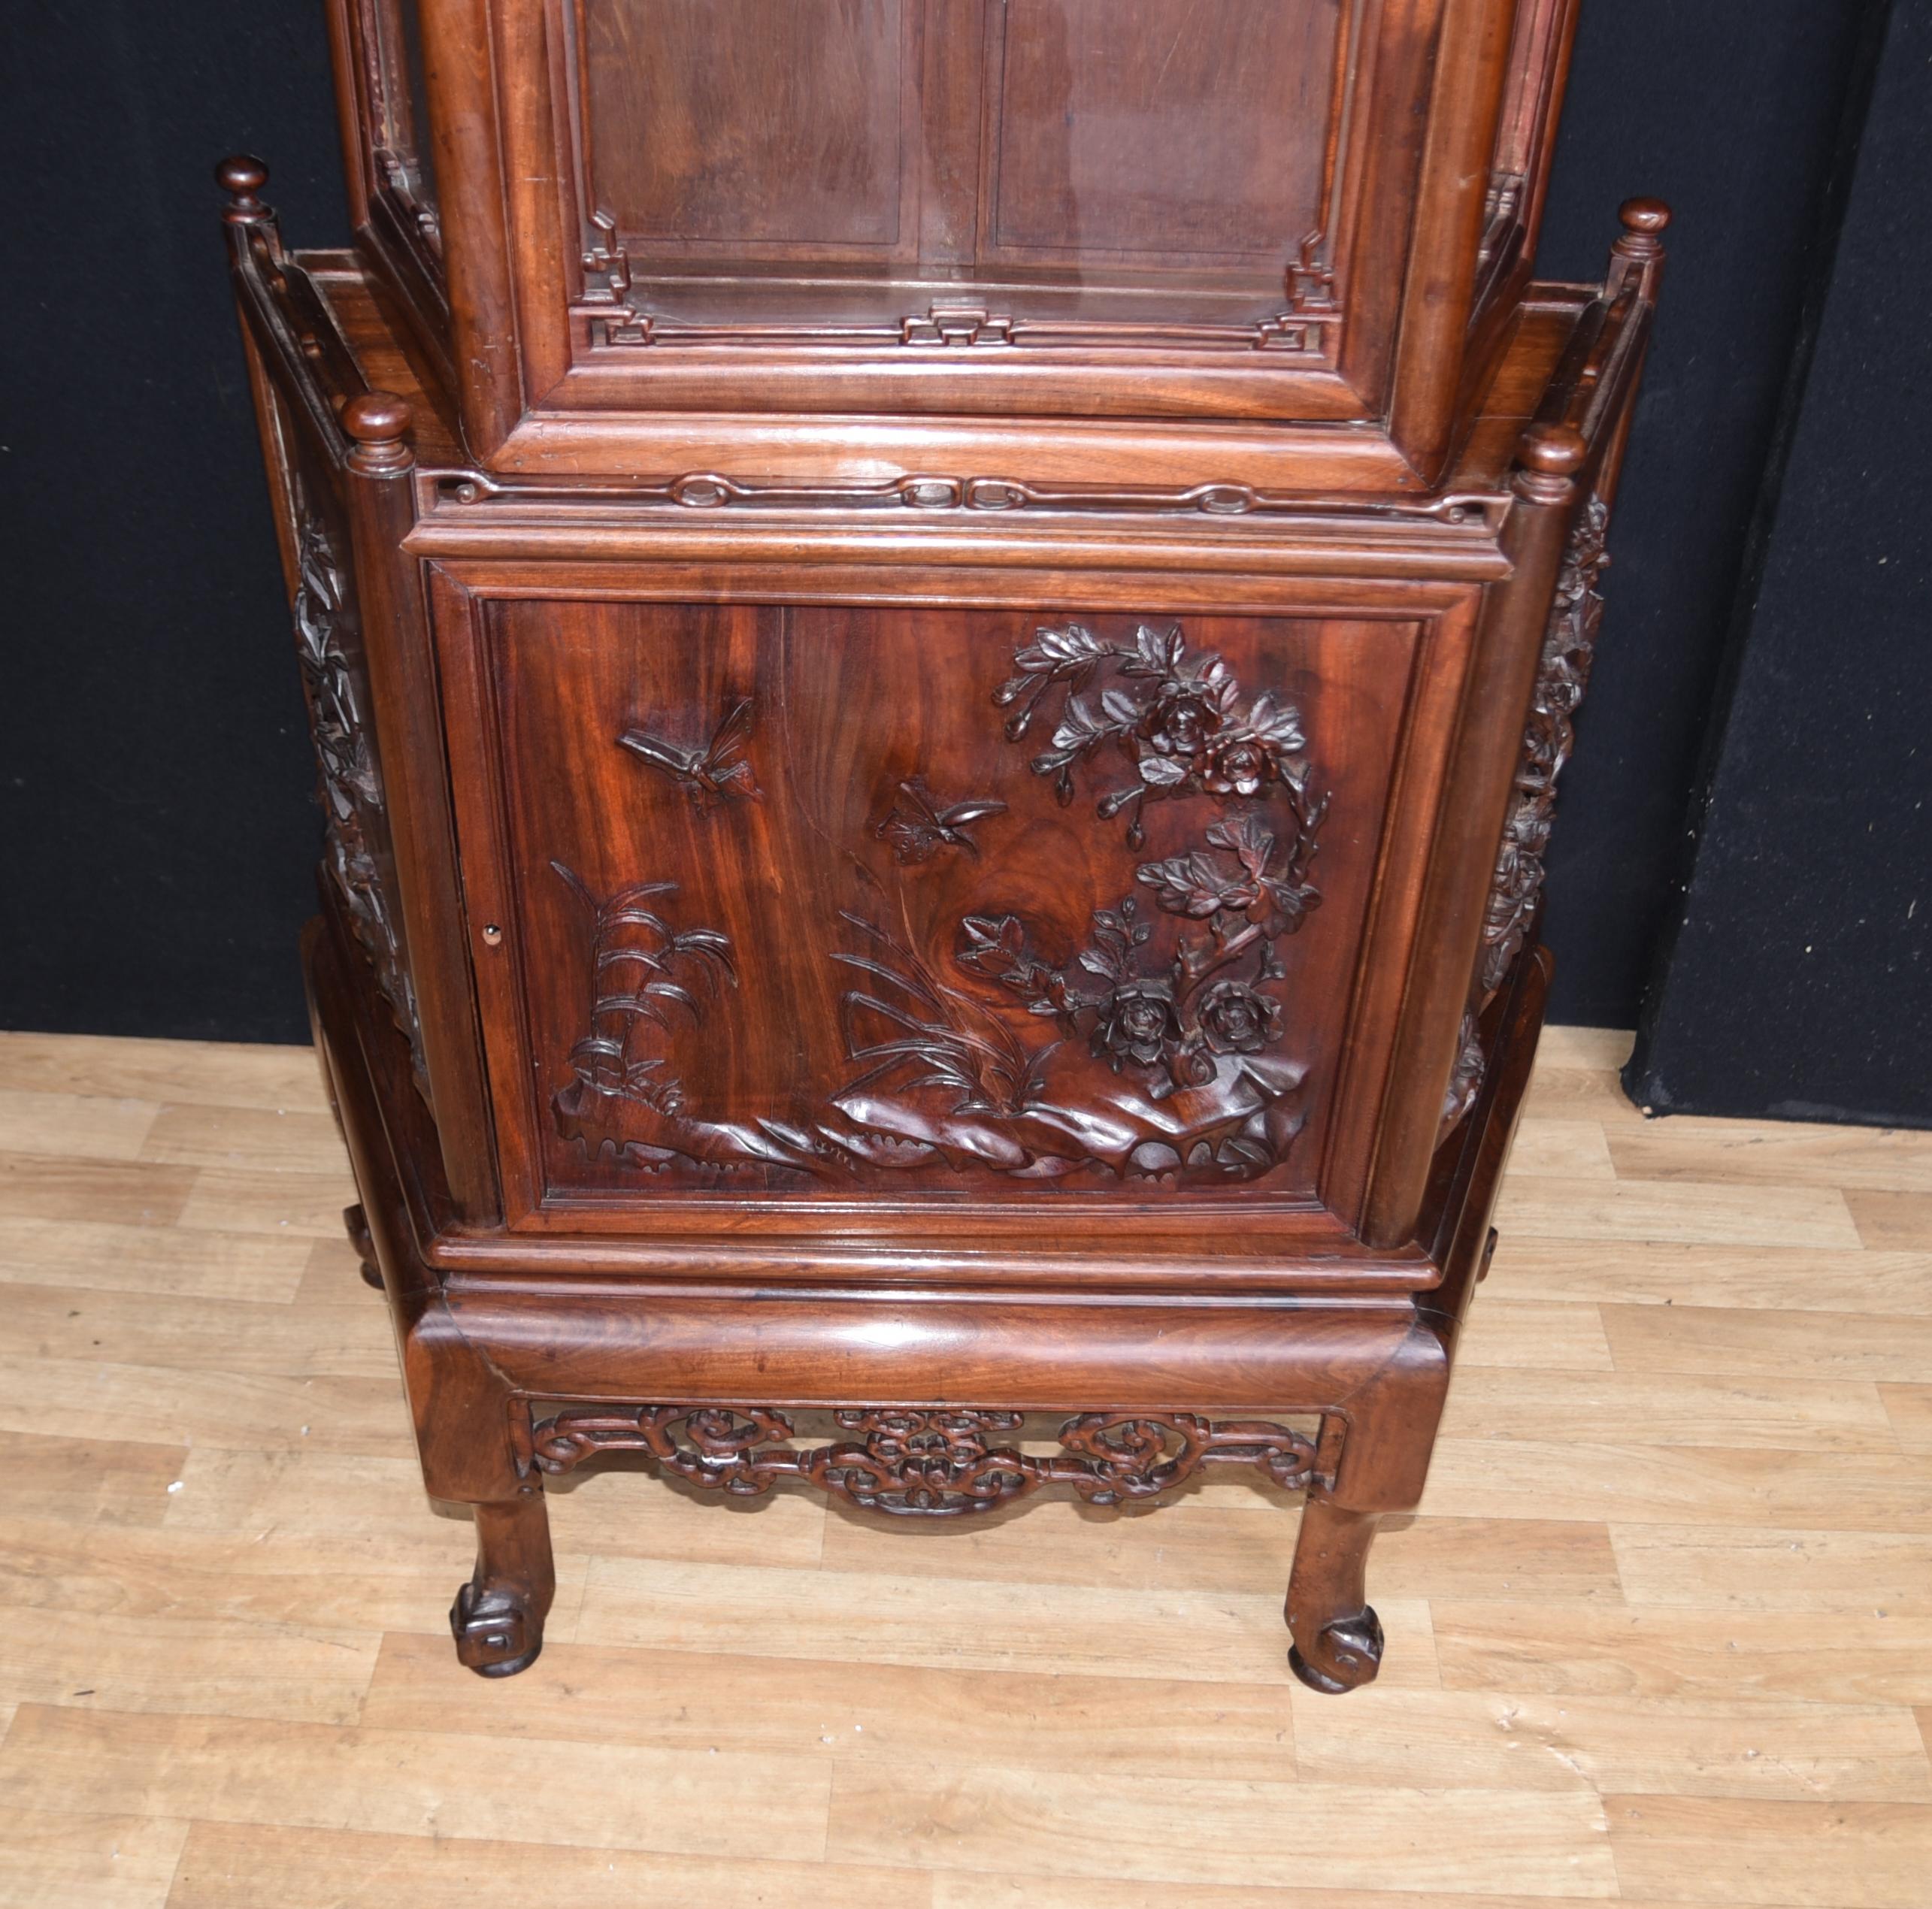 - Gorgeous antique Chinese padauk hardwood display cabinet
- Unusual work, our attention was initially drawn to the fact that the carving is deep relief from the solid wood and not applied
- Great as a display cabinet or bookcase
- Carved details